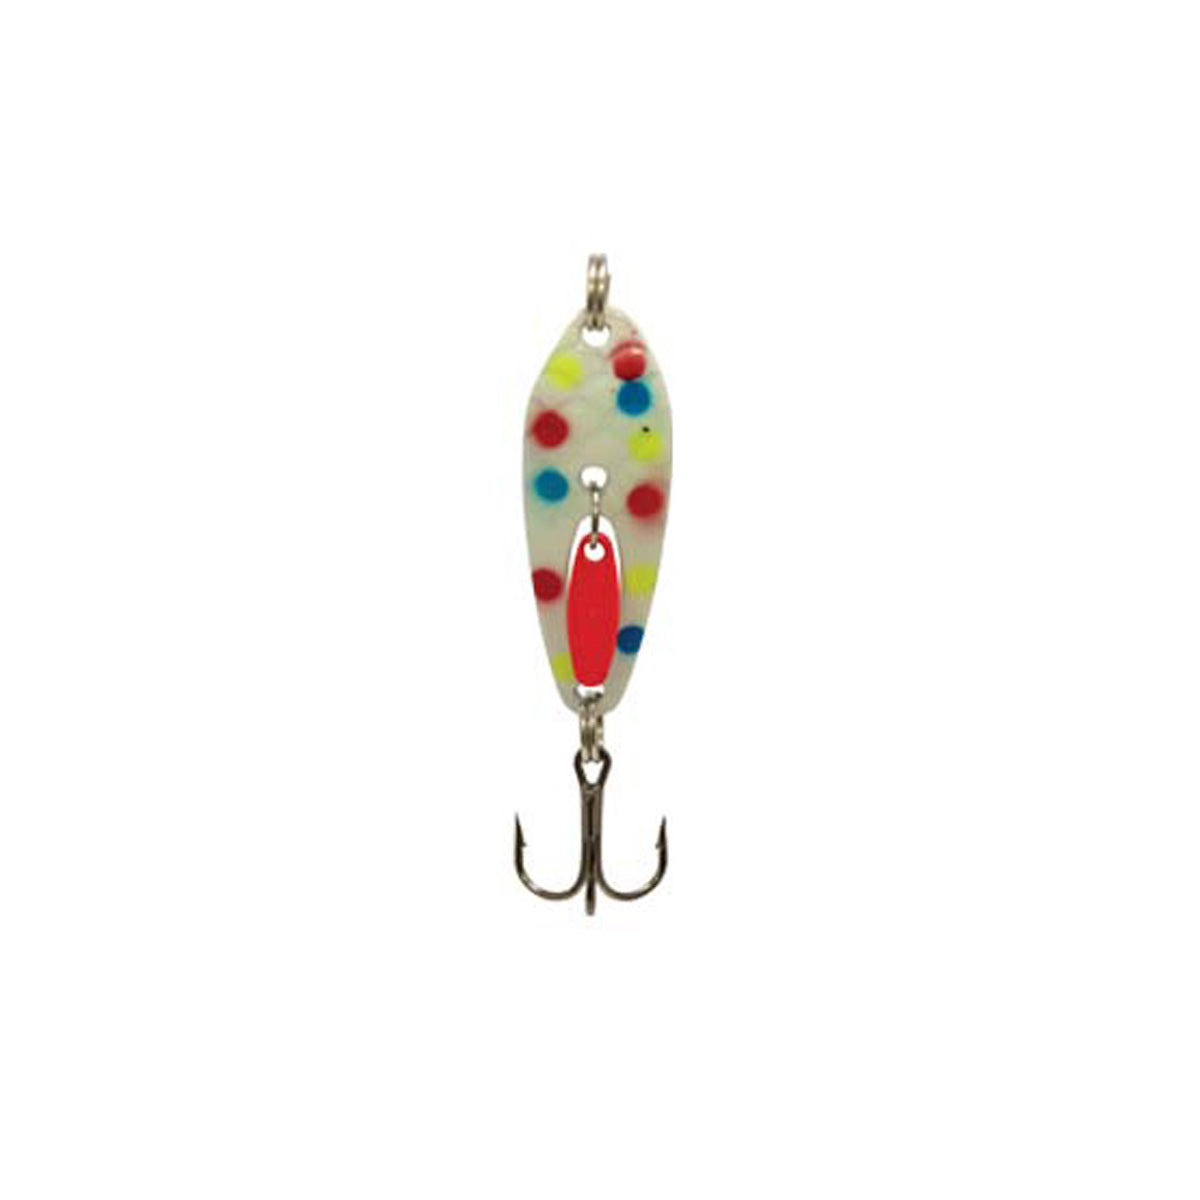 Fishing lures for sale we offer great range of lures Metal, soft plastic  and hard body fishing lures